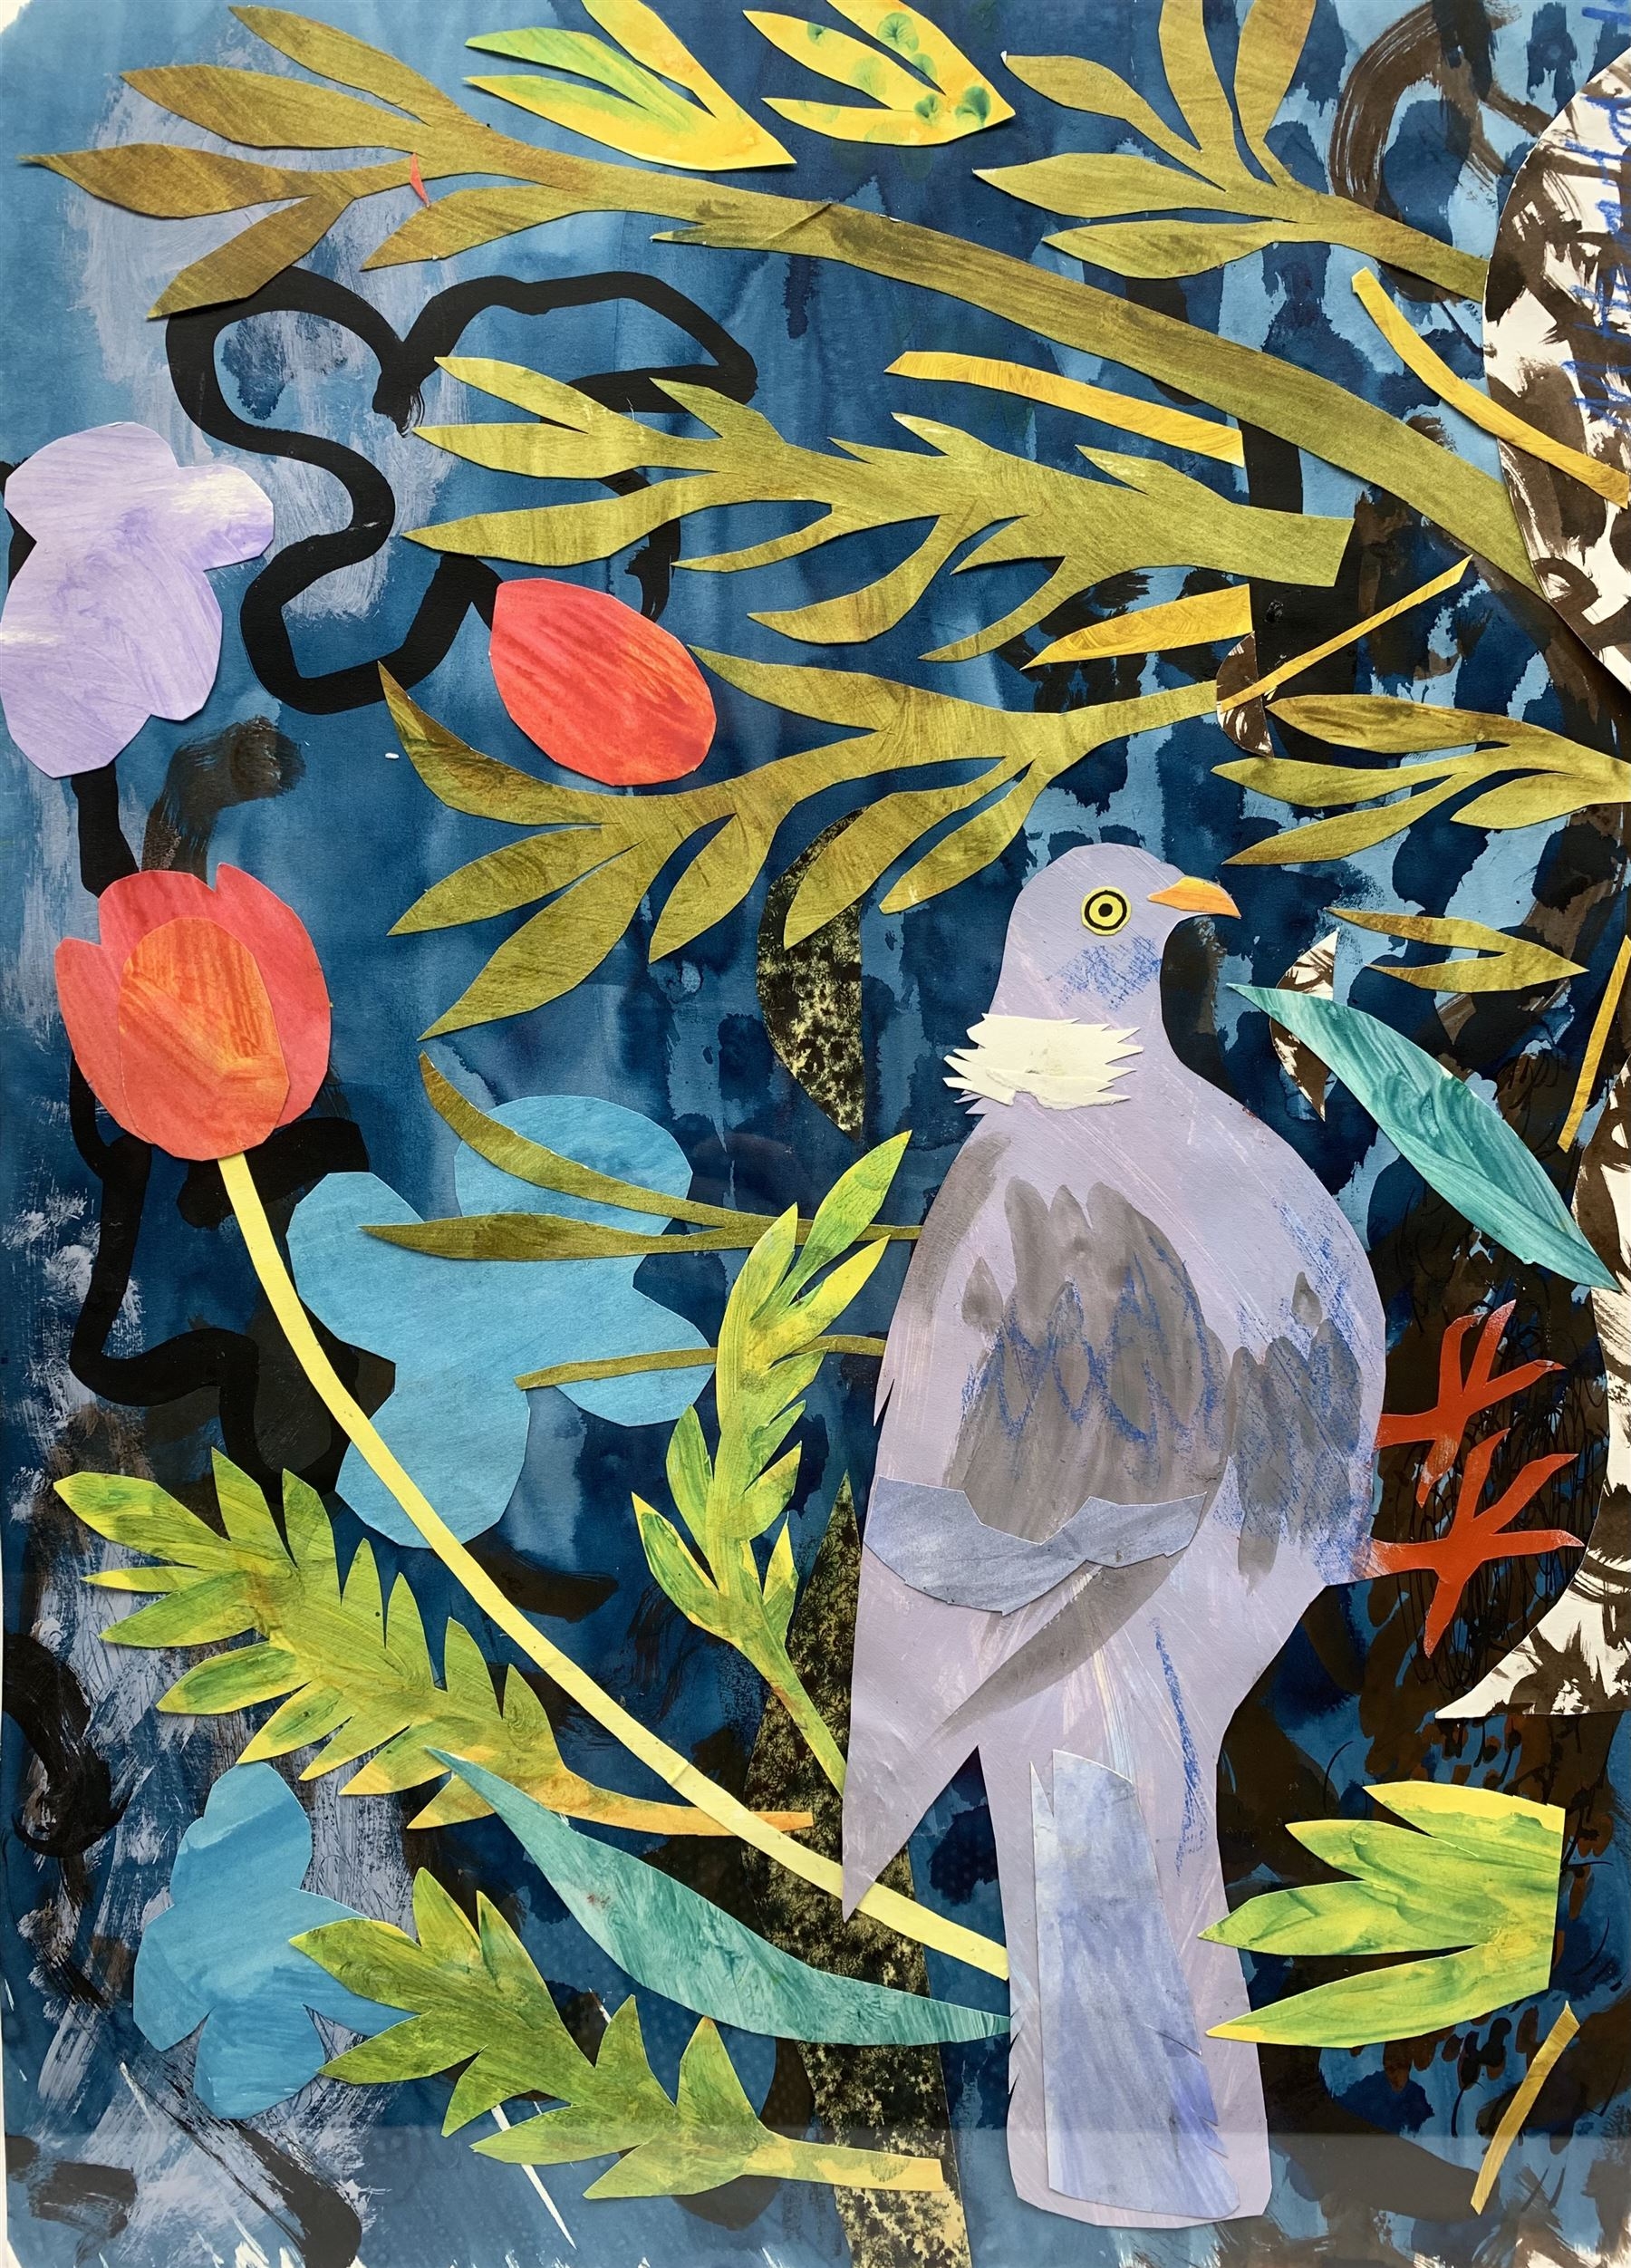 Pigeon by Mark Hearld, '14